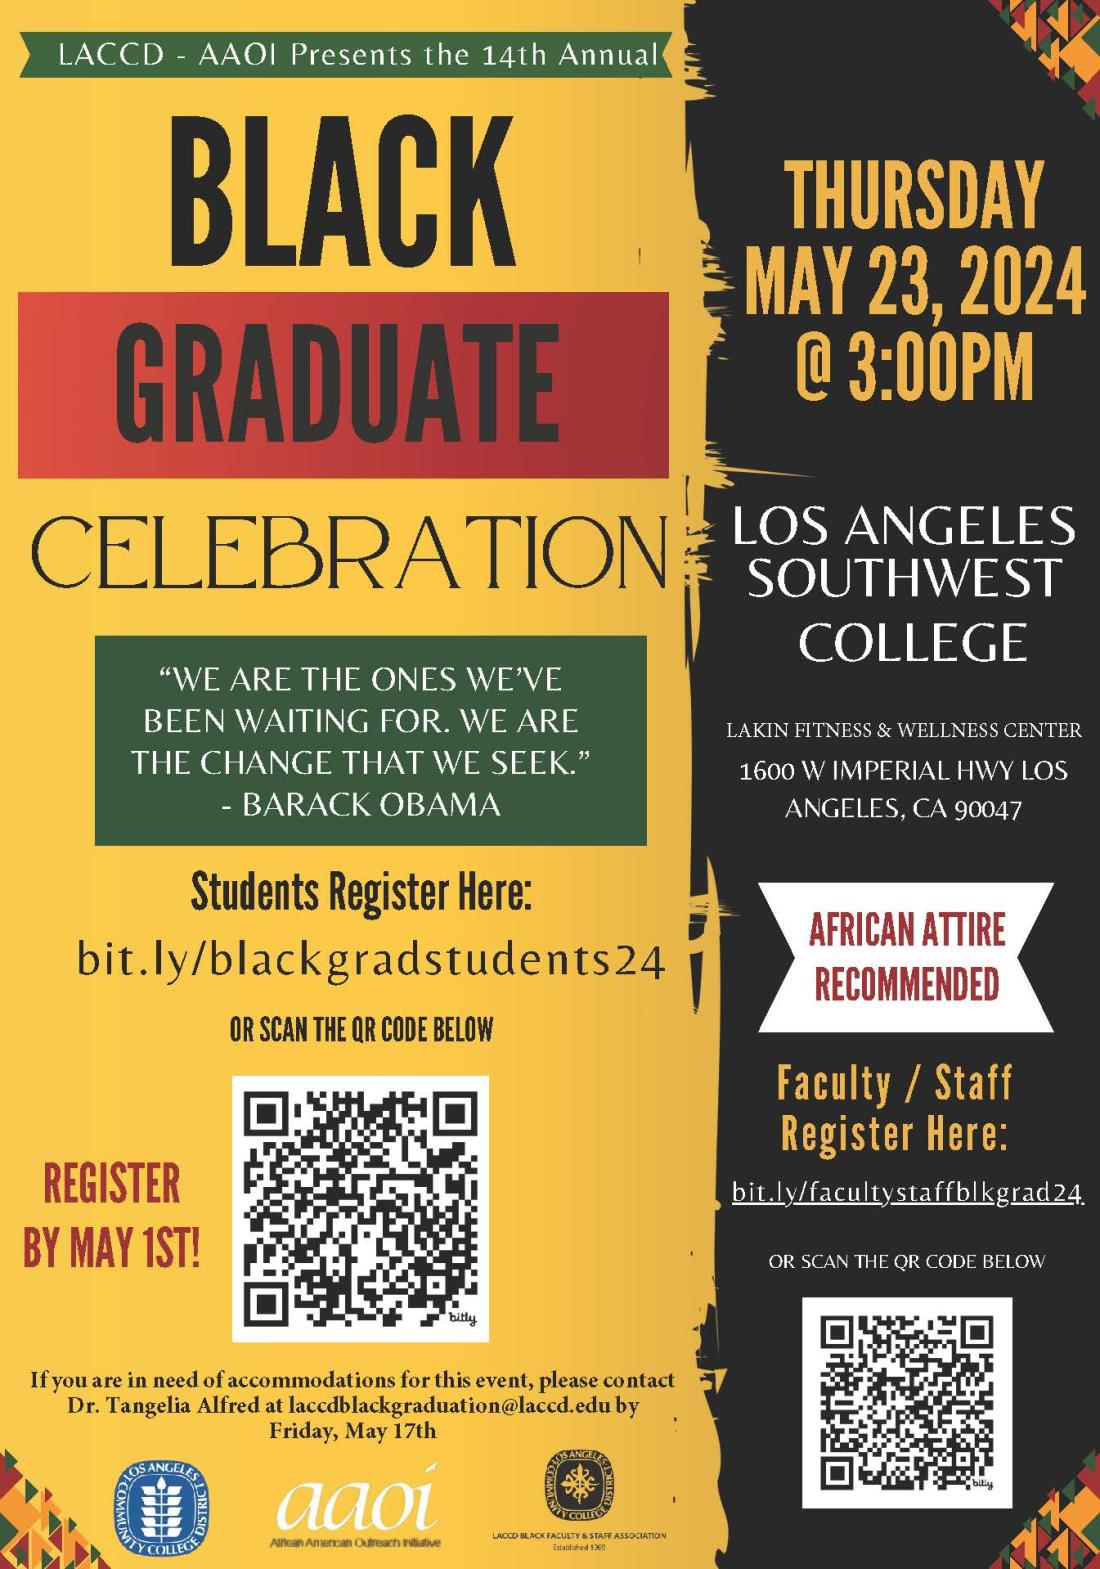 LACCD flyer for the Black Graduate with date/time/location and registration details.